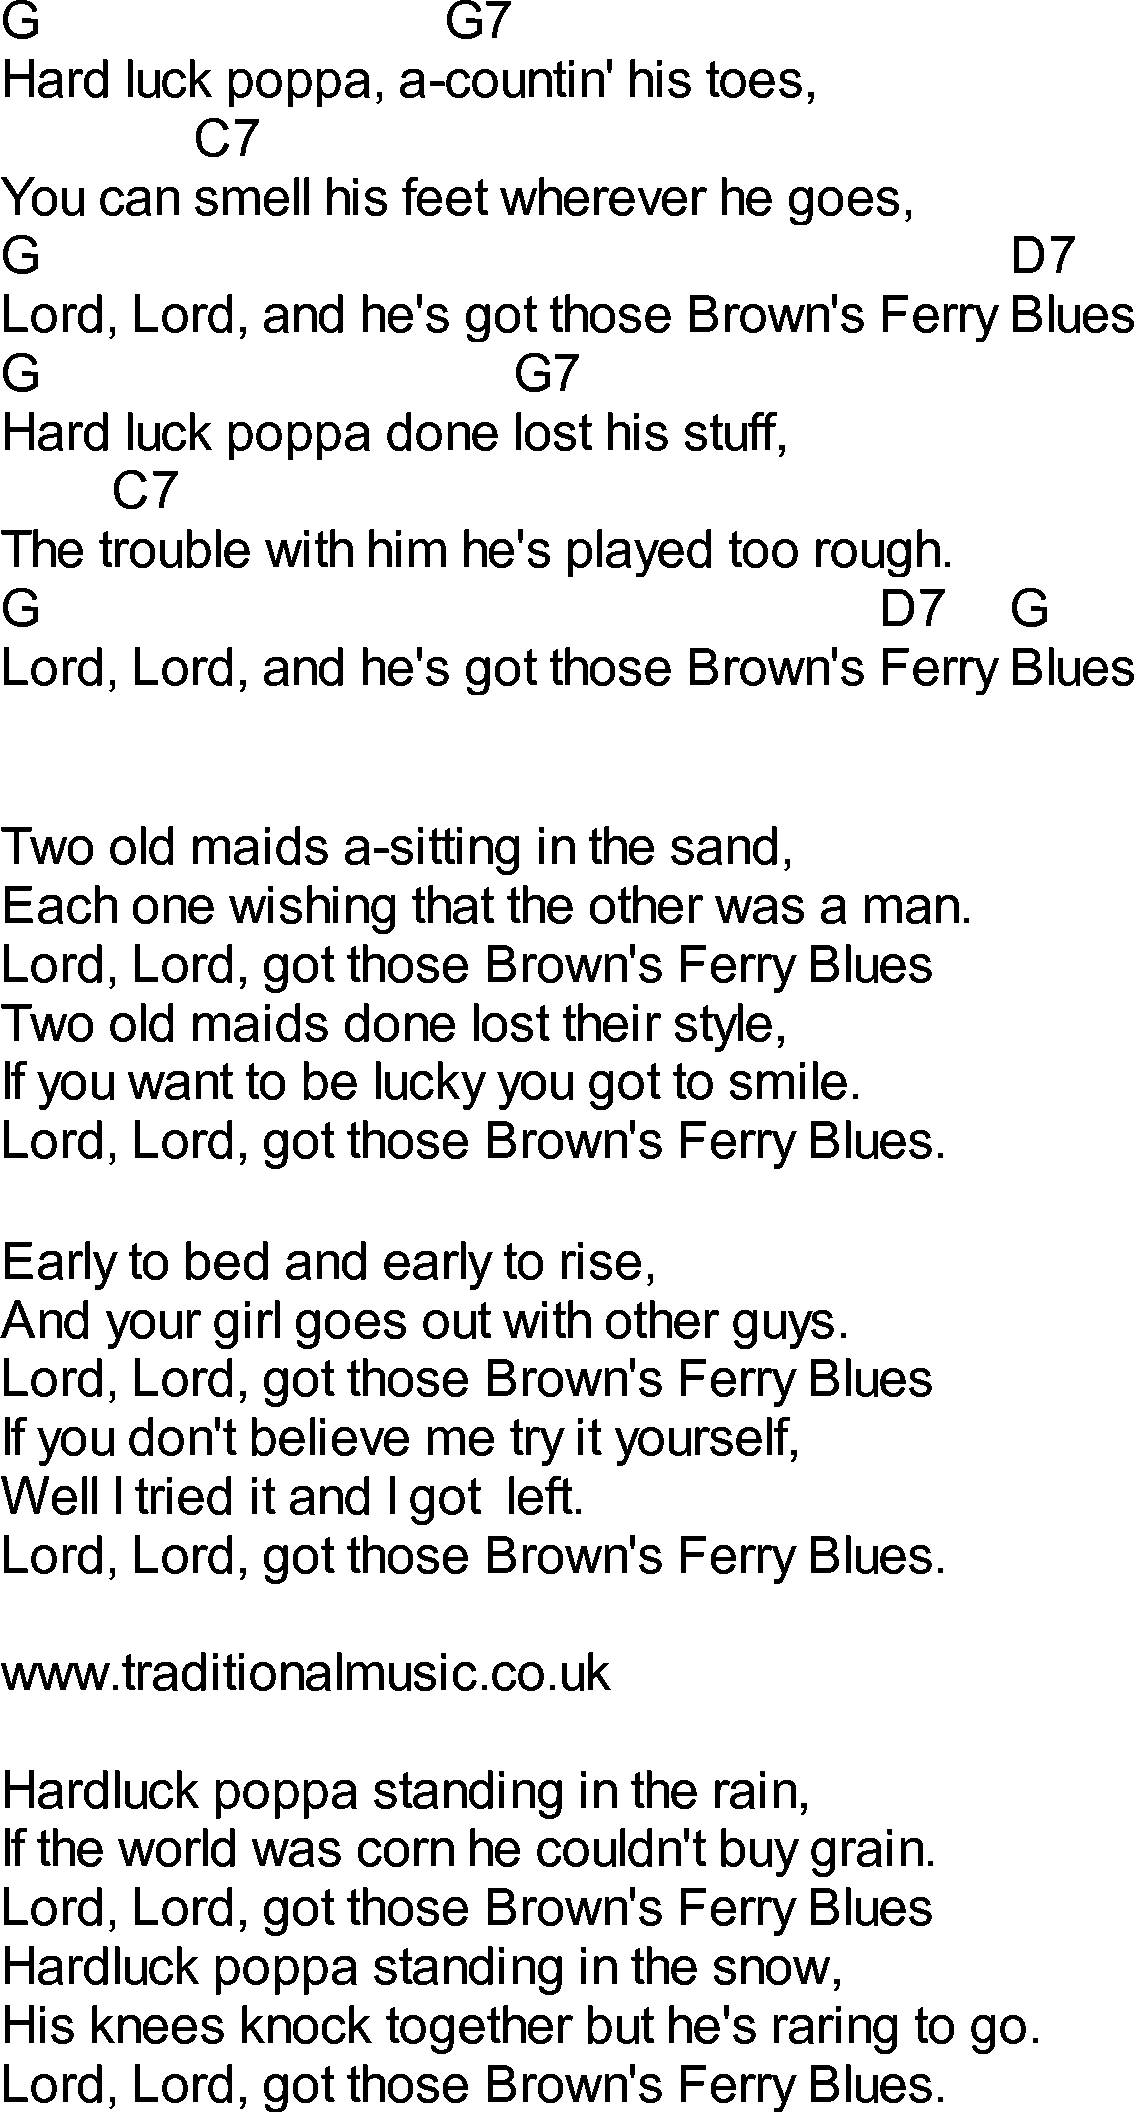 Bluegrass songs with chords - Browns Ferry Blues